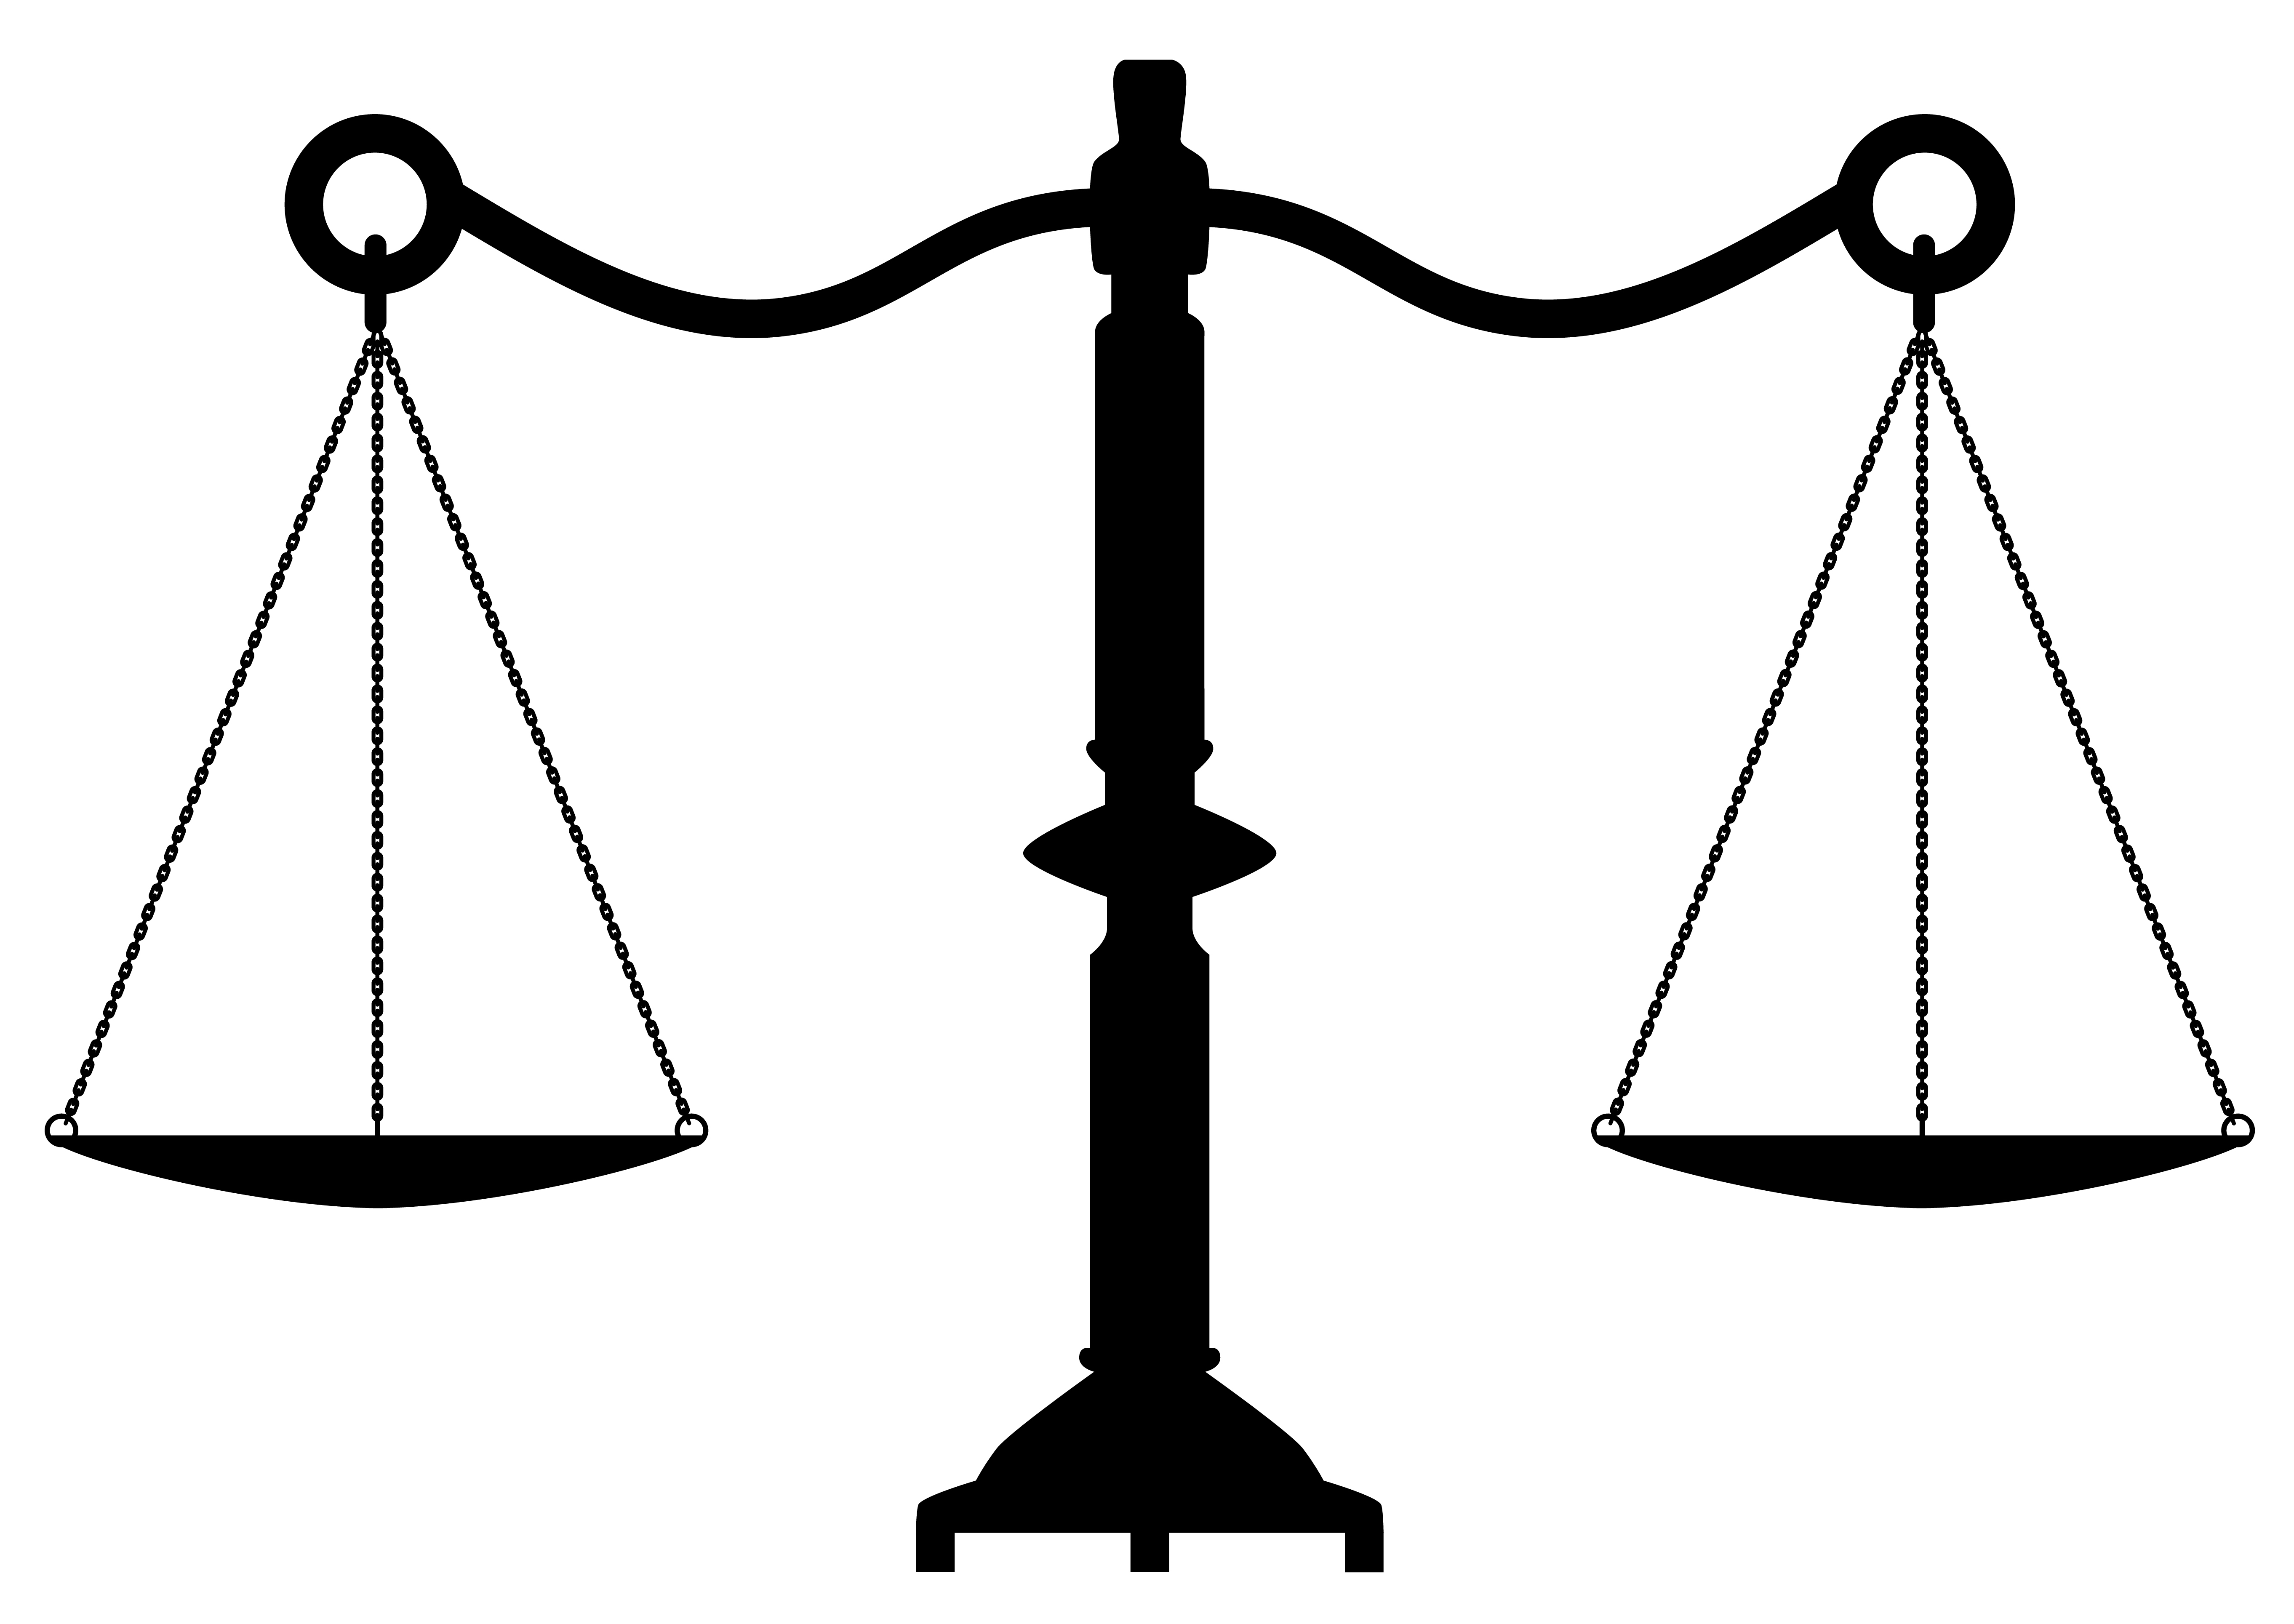 Scales Of Justice Vector - ClipArt Best